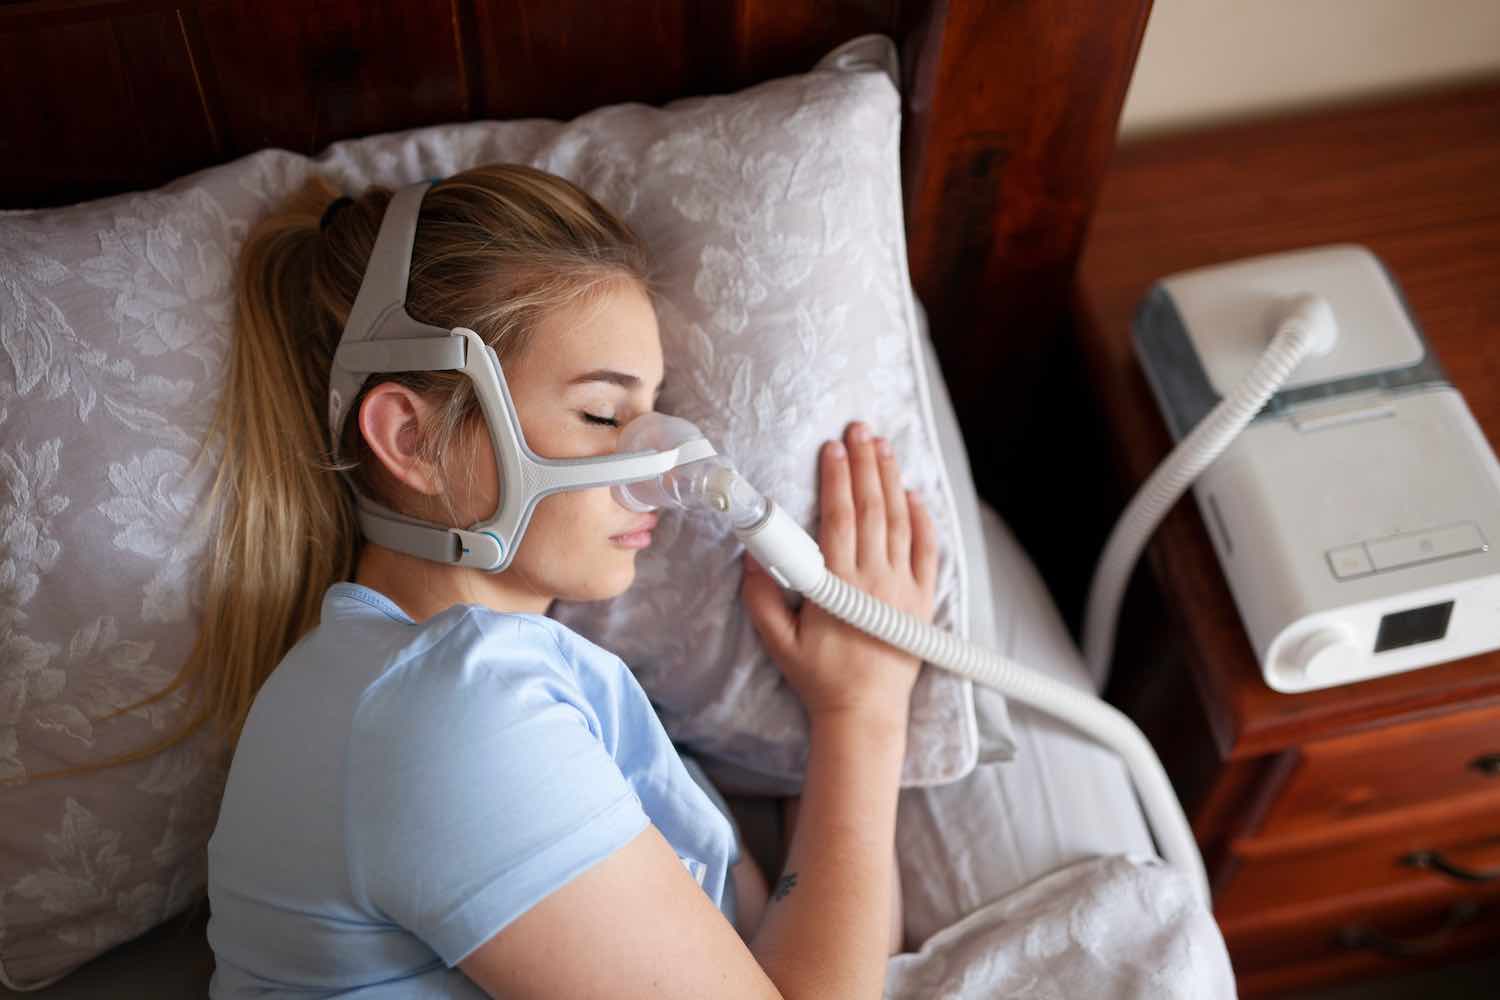 Live better with these CPAP machines’ tips